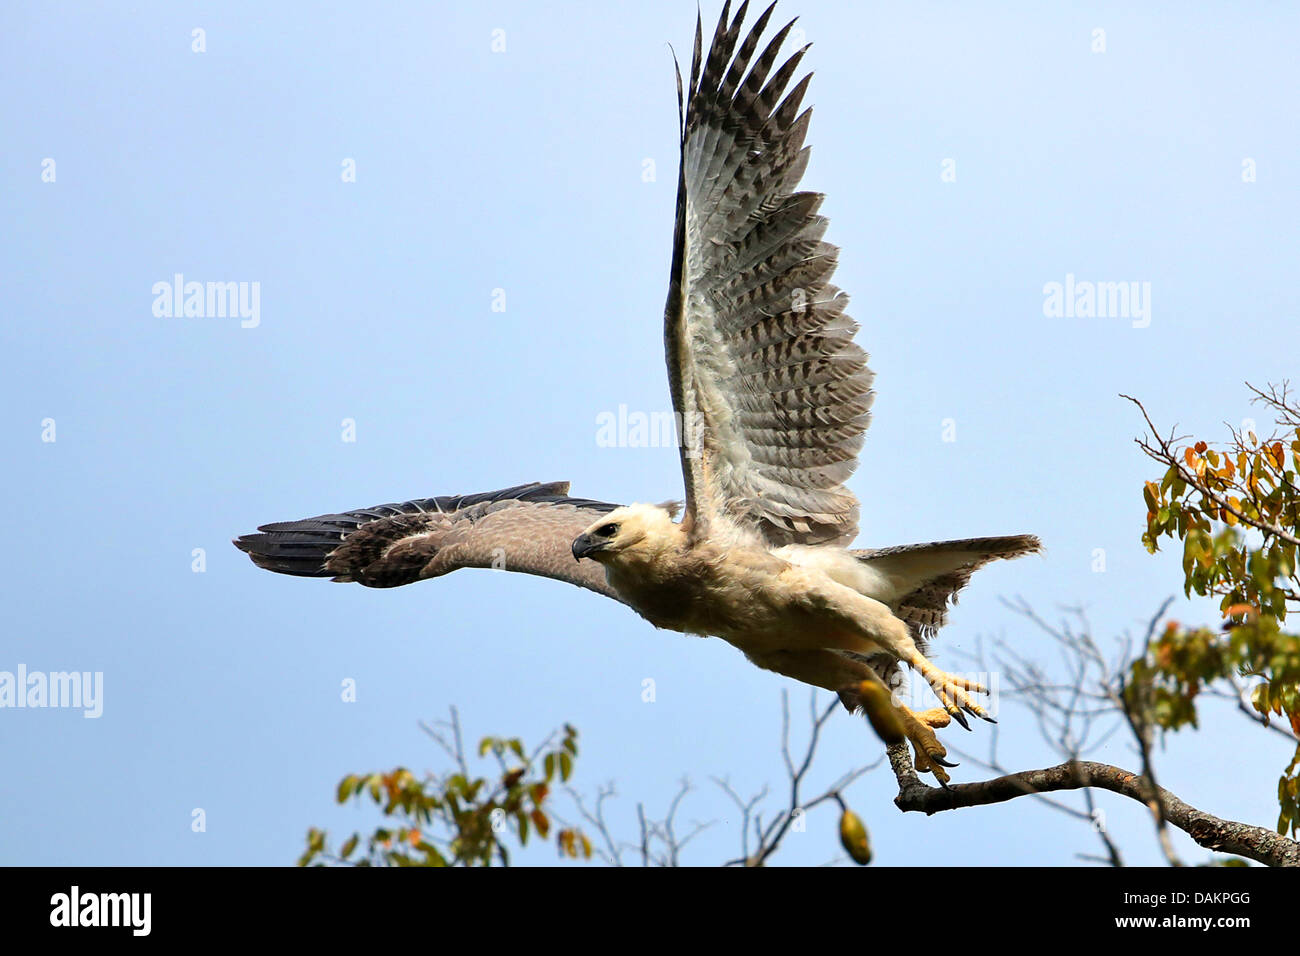 Harpy eagle (Harpia harpyja), Immature at the first tries to fly